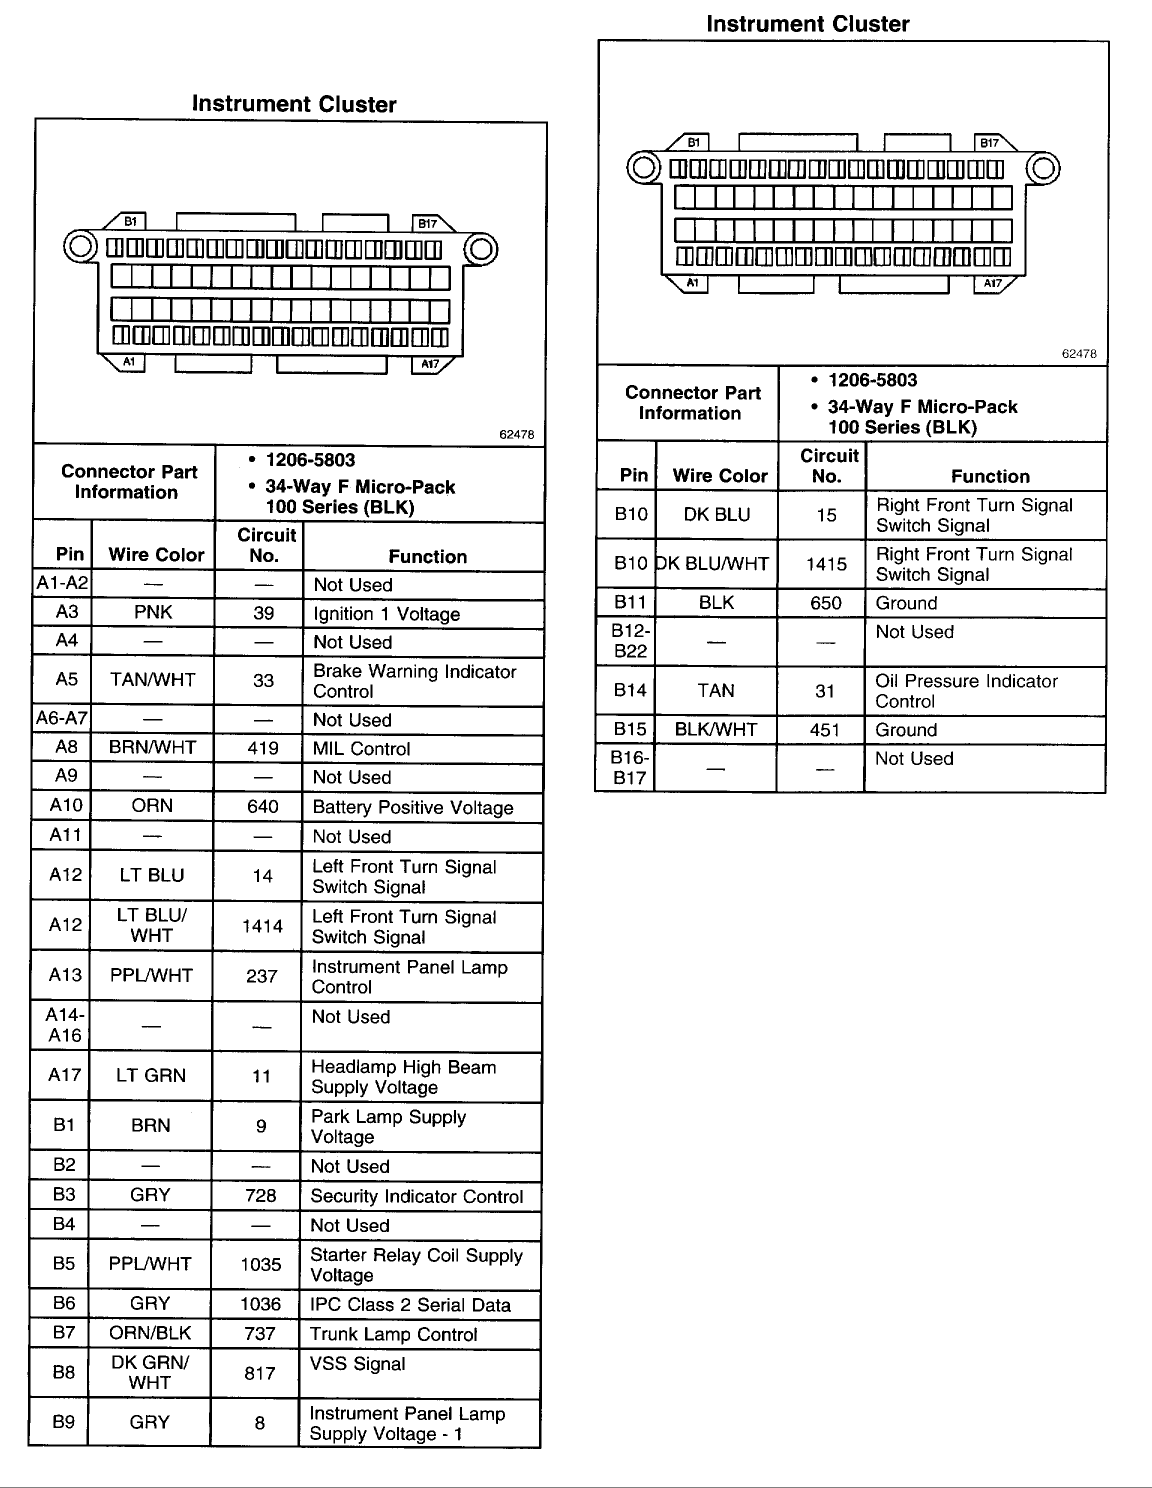 Wiring schematic for 2002 gauge cluster? - LS1TECH - Camaro and